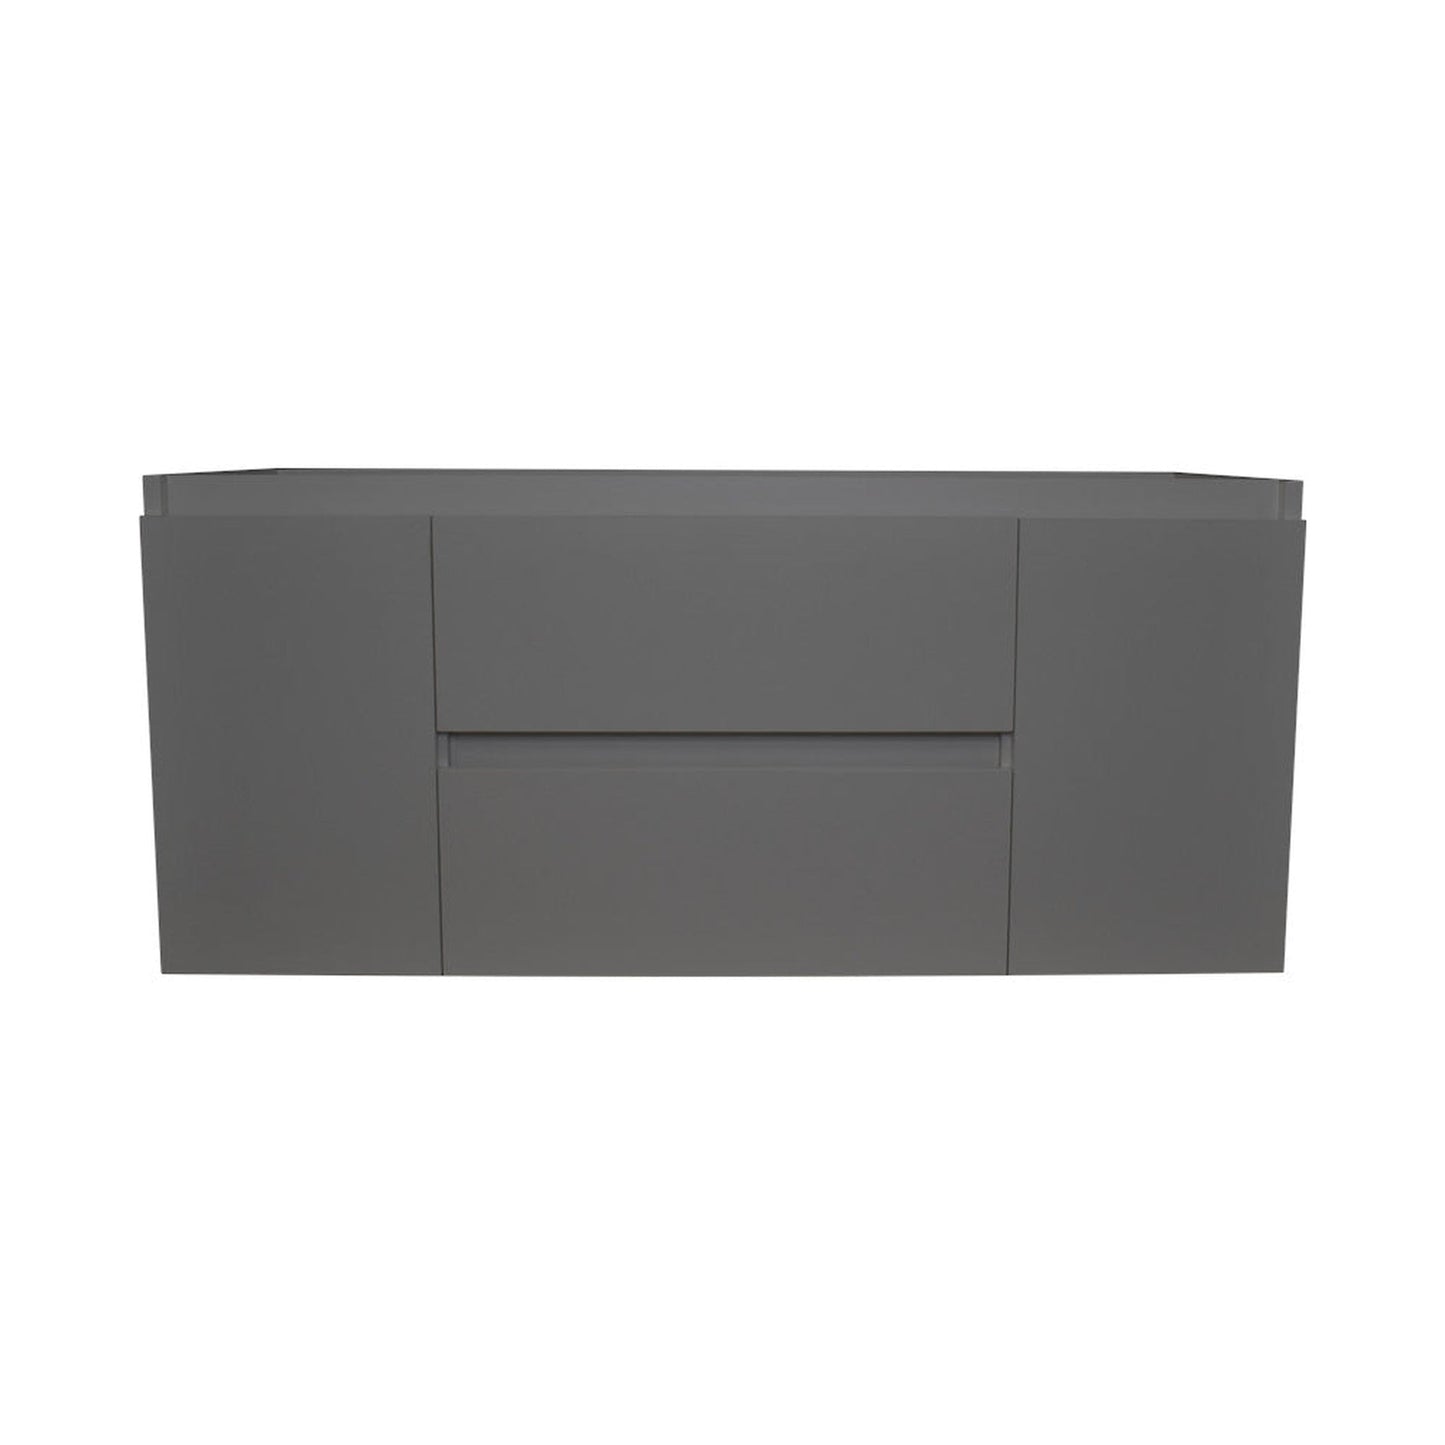 Volpa USA Salt 48" x 20" Gray Wall-Mounted Floating Bathroom Vanity Cabinet with Drawers